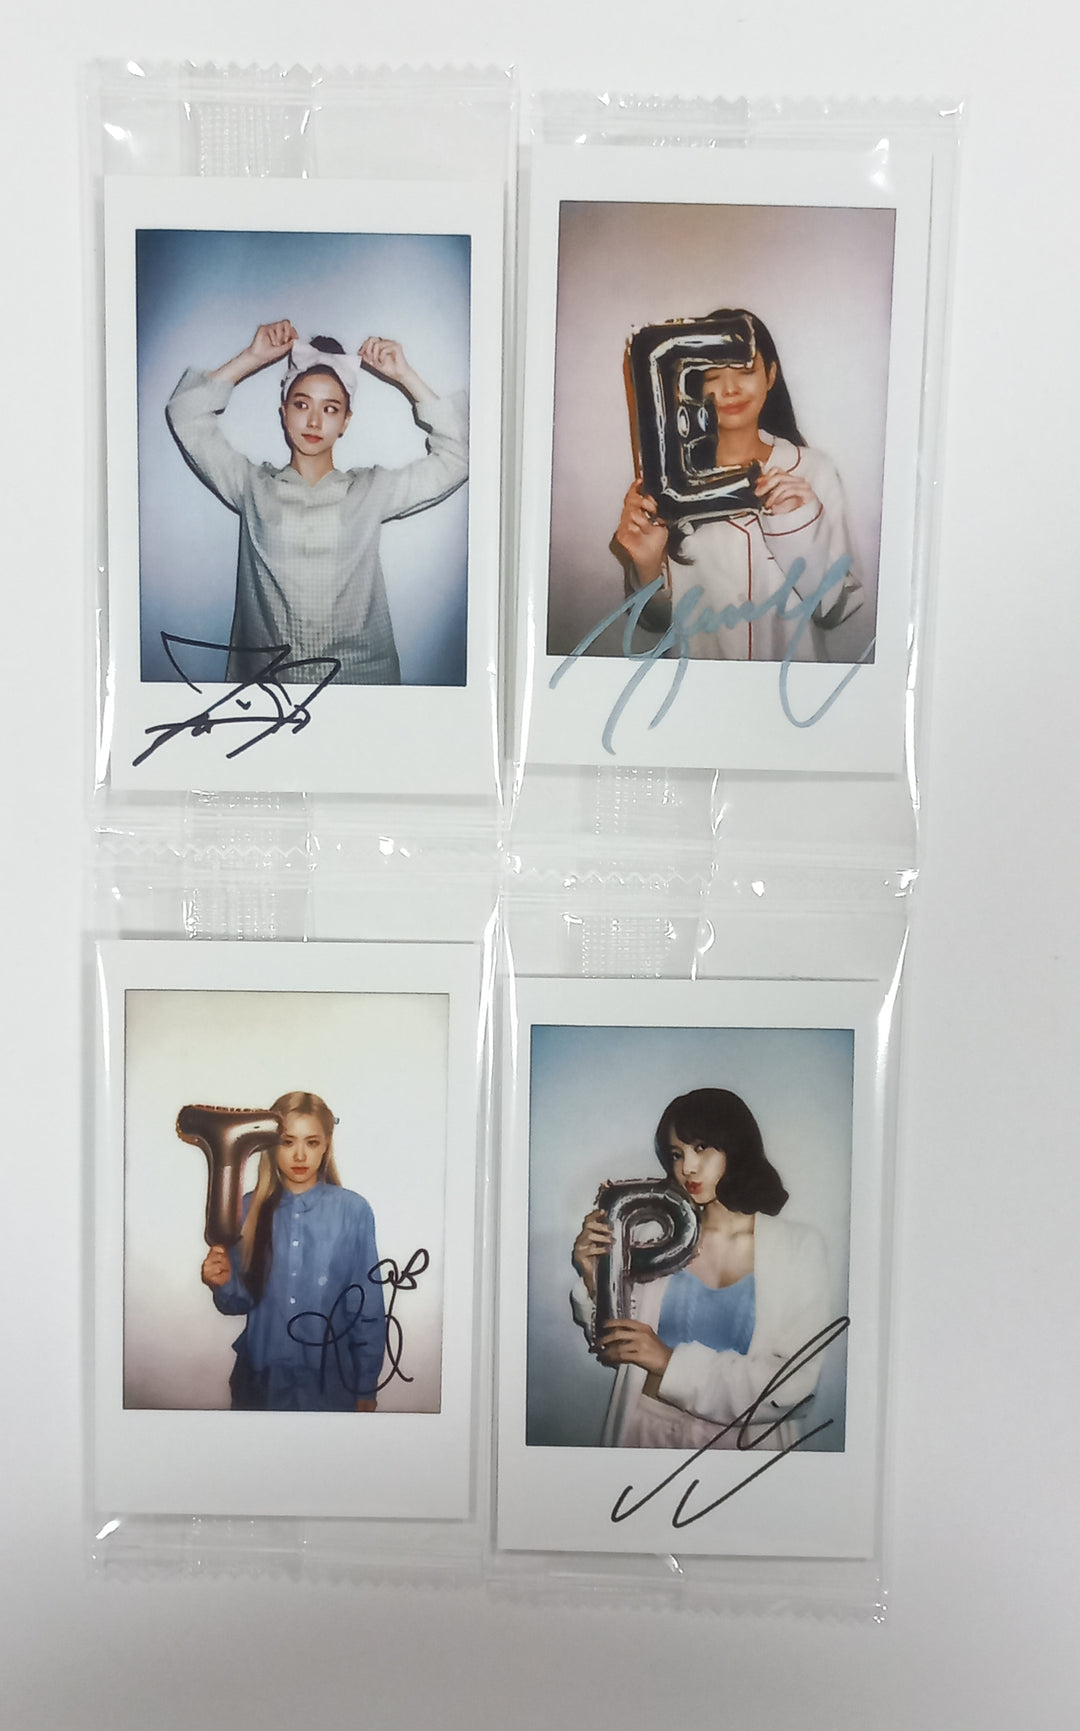 BLACKPINK "THE GAME PHOTOCARD COLLECTION" - Ktown4U Special Gift Event Polaroid Type Photocard [23.10.13]